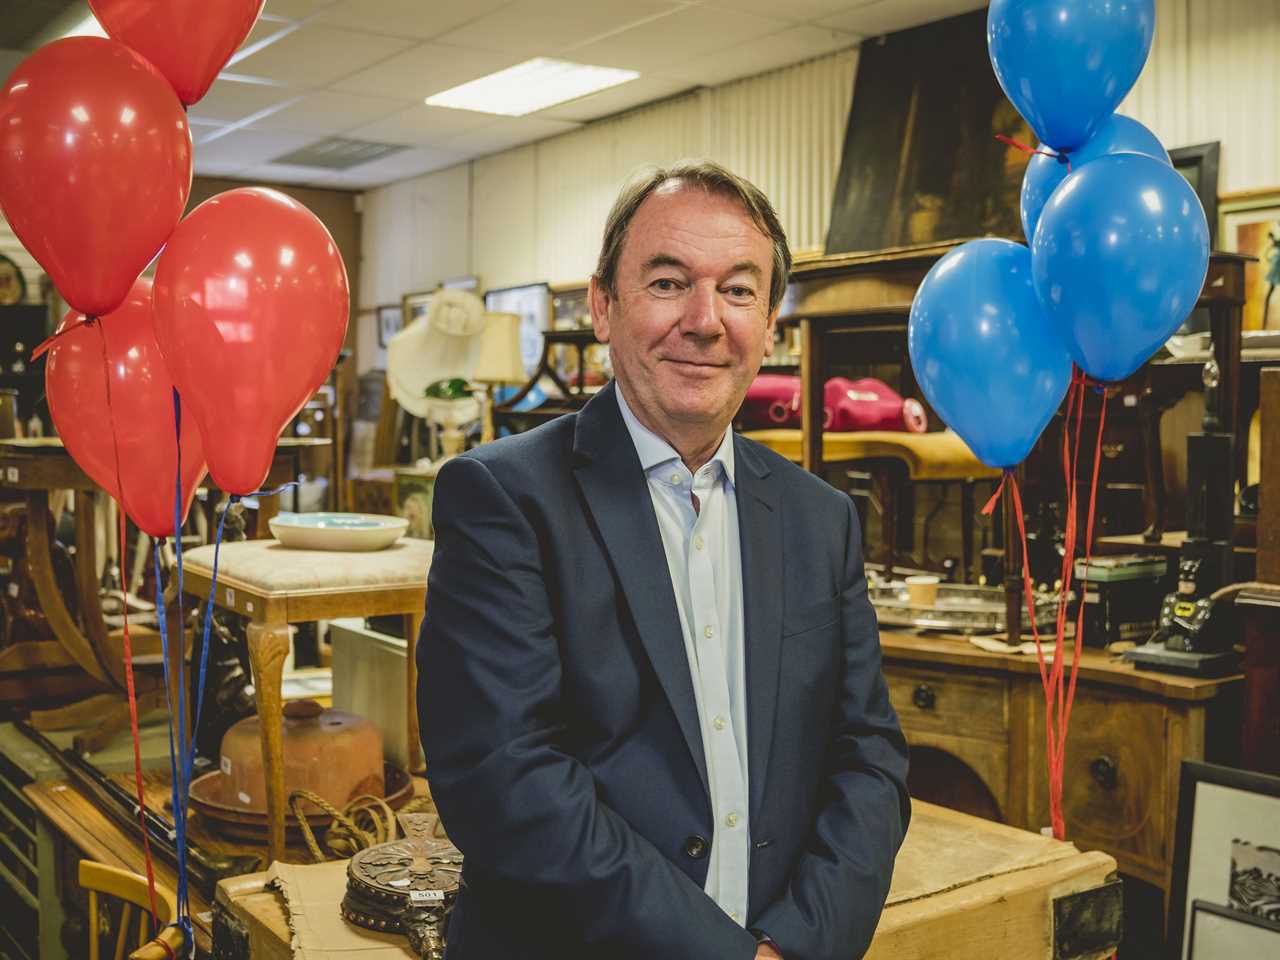 Bargain Hunt's Eric Knowles Opens Up About Childhood Health Battle